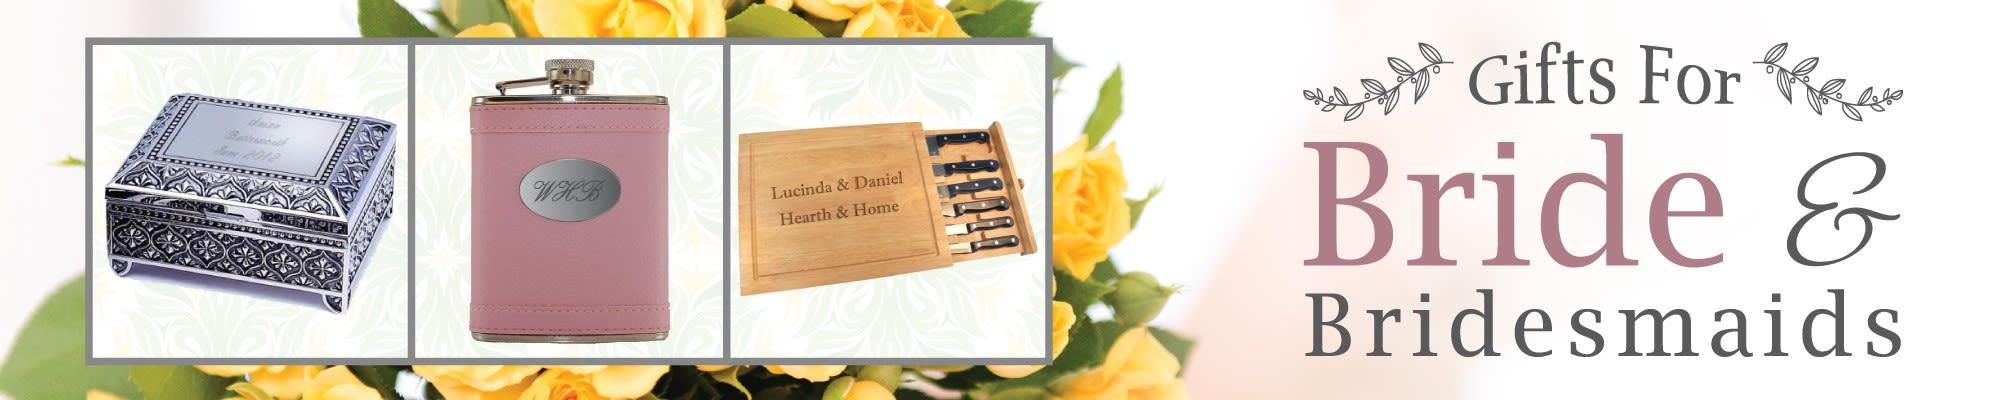 Gifts For Bride & Bridesmaids